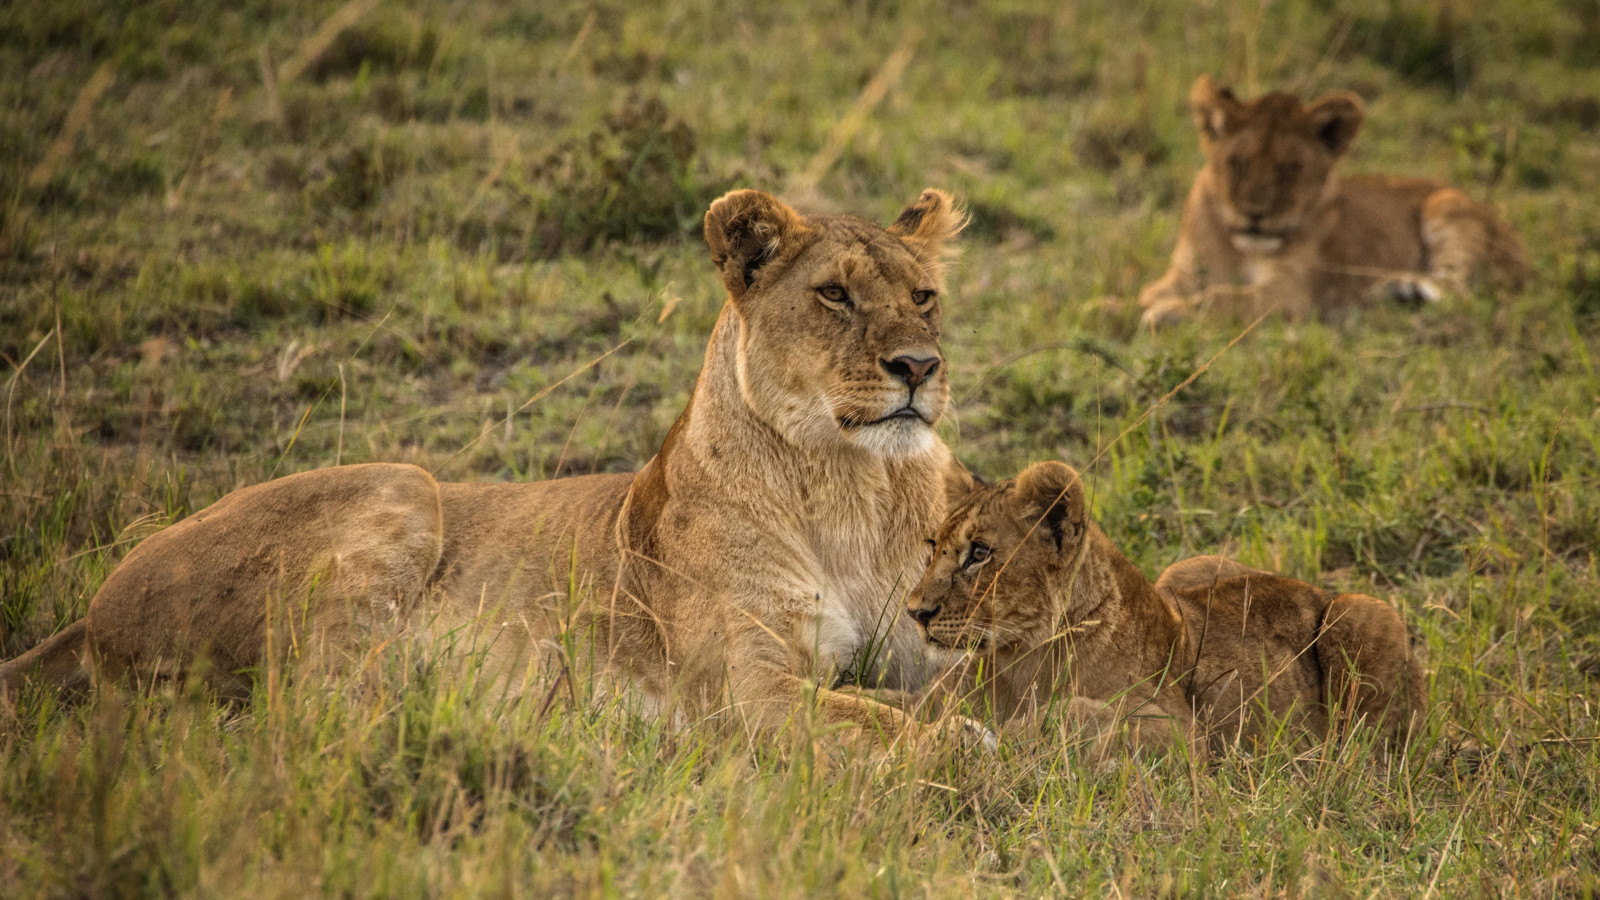 Lioness with cubs from Serengeti wallpaper 1600x900